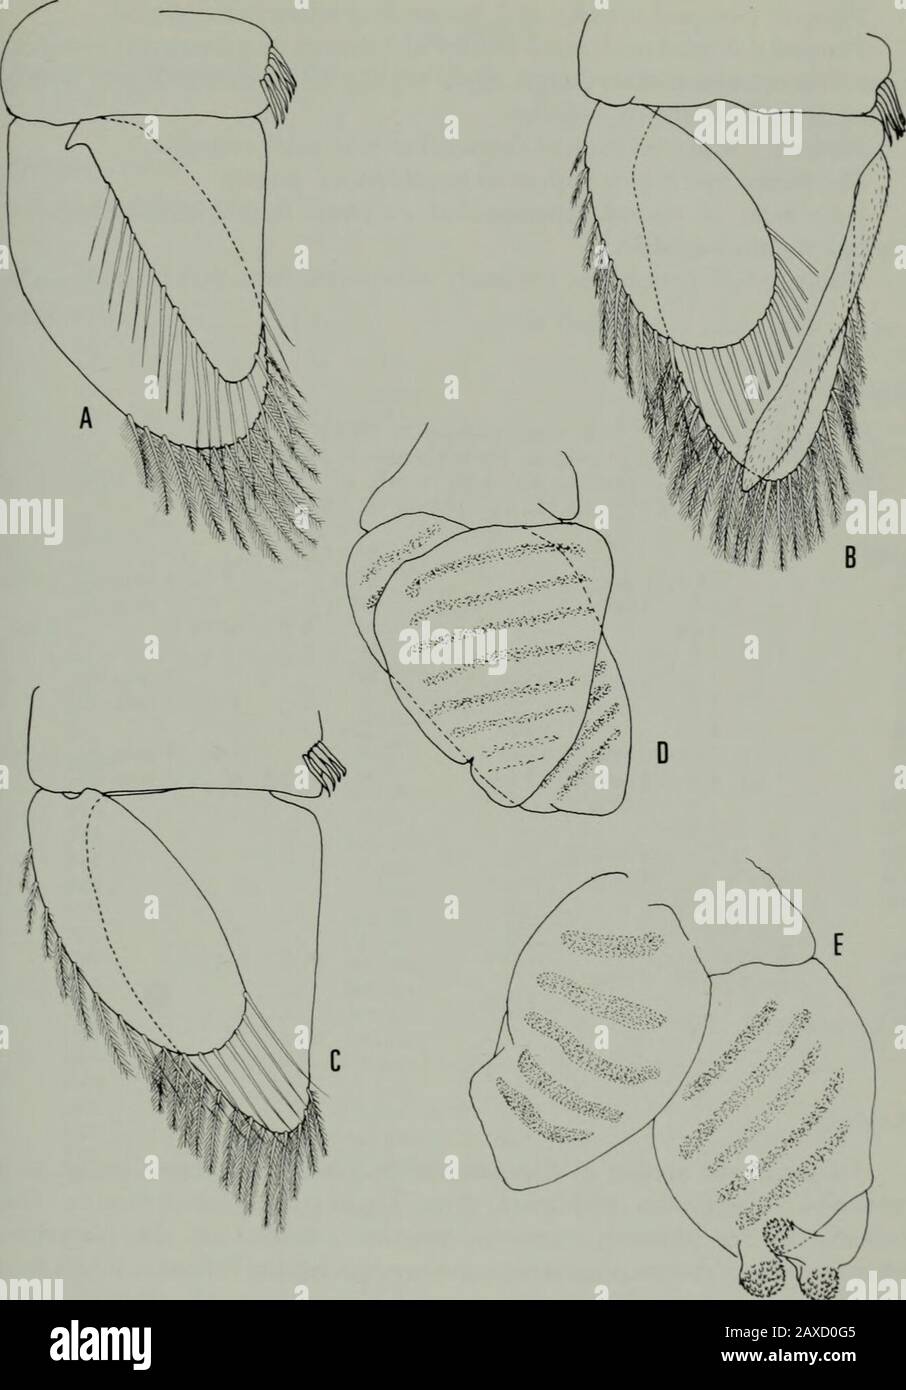 Annals of the South African MuseumAnnale van die Suid-Afrikaanse Museum . Fig. 8. Cymodocella sapmeri sp. nov.A—Antenna; B—Antennule; C—Pereiopod I; D—Pereiopod VII; E—Penes. Second maxilla, inner ramus with about ten fringed spines, both lobes ofouter ramus tipped with four or five pectinate curved spines. Maxillipedal palp 5-segmented, second segment longest; segments two,three and four somewhat lobed, lobes bearing clumps of simple setae; enditebearing about ten fringed spines, and single coupling hook. Pereiopod I with propodus, carpus, merus, and distal part of ischiumbearing pile of fine Stock Photo